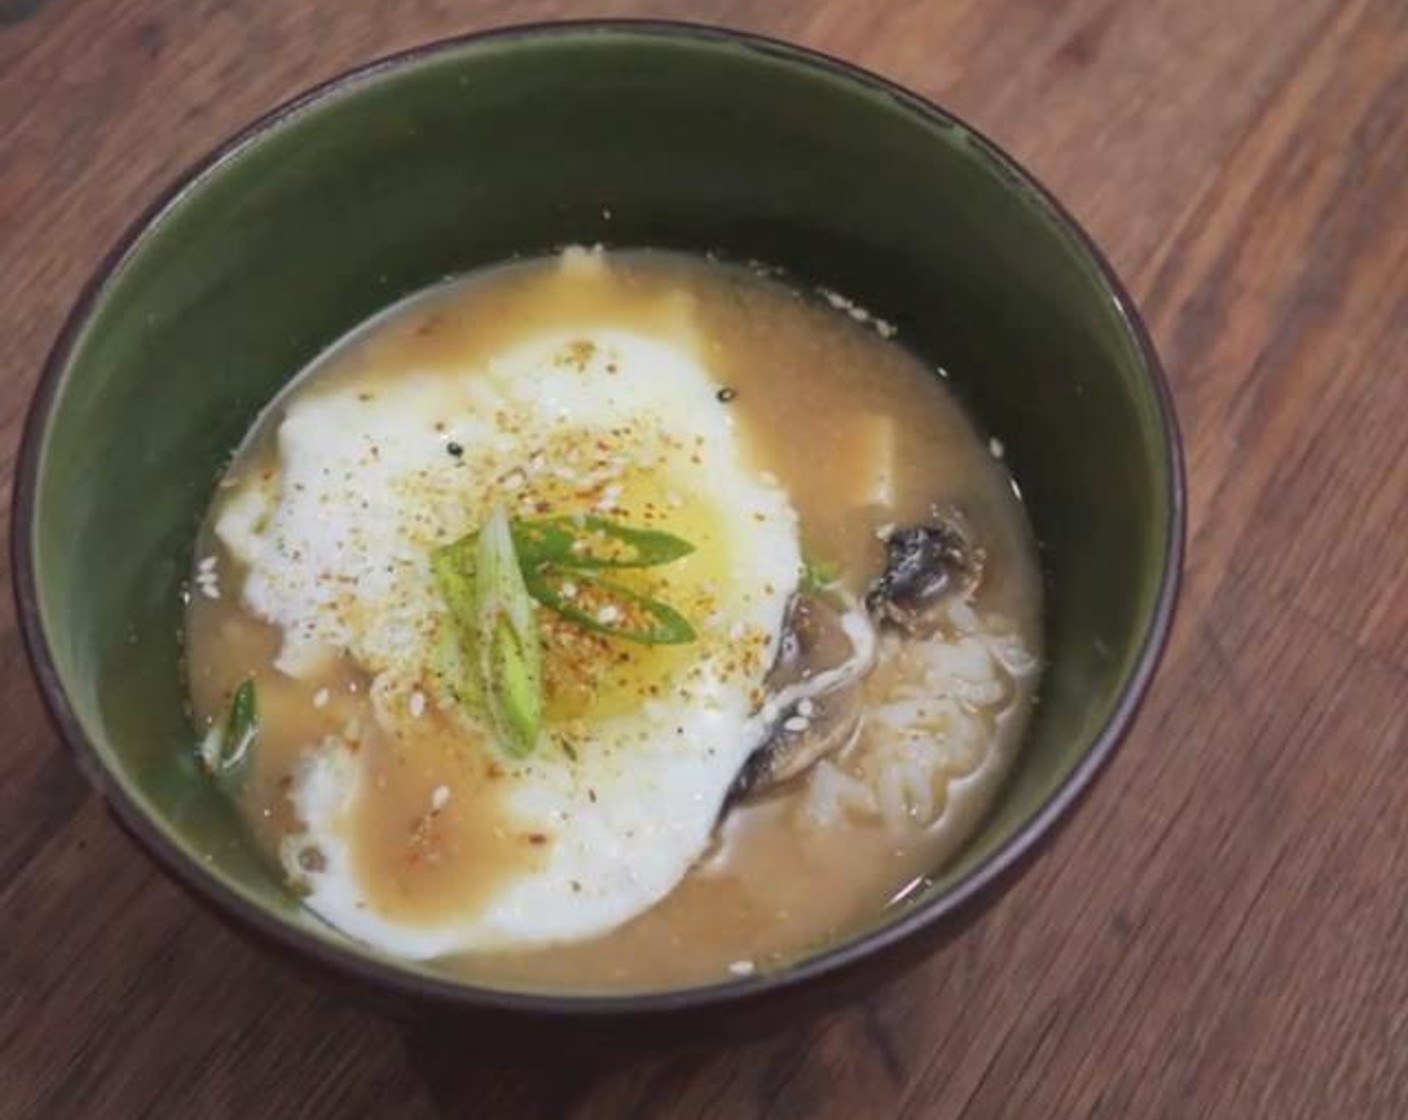 Homemade Miso Soup with a Twist